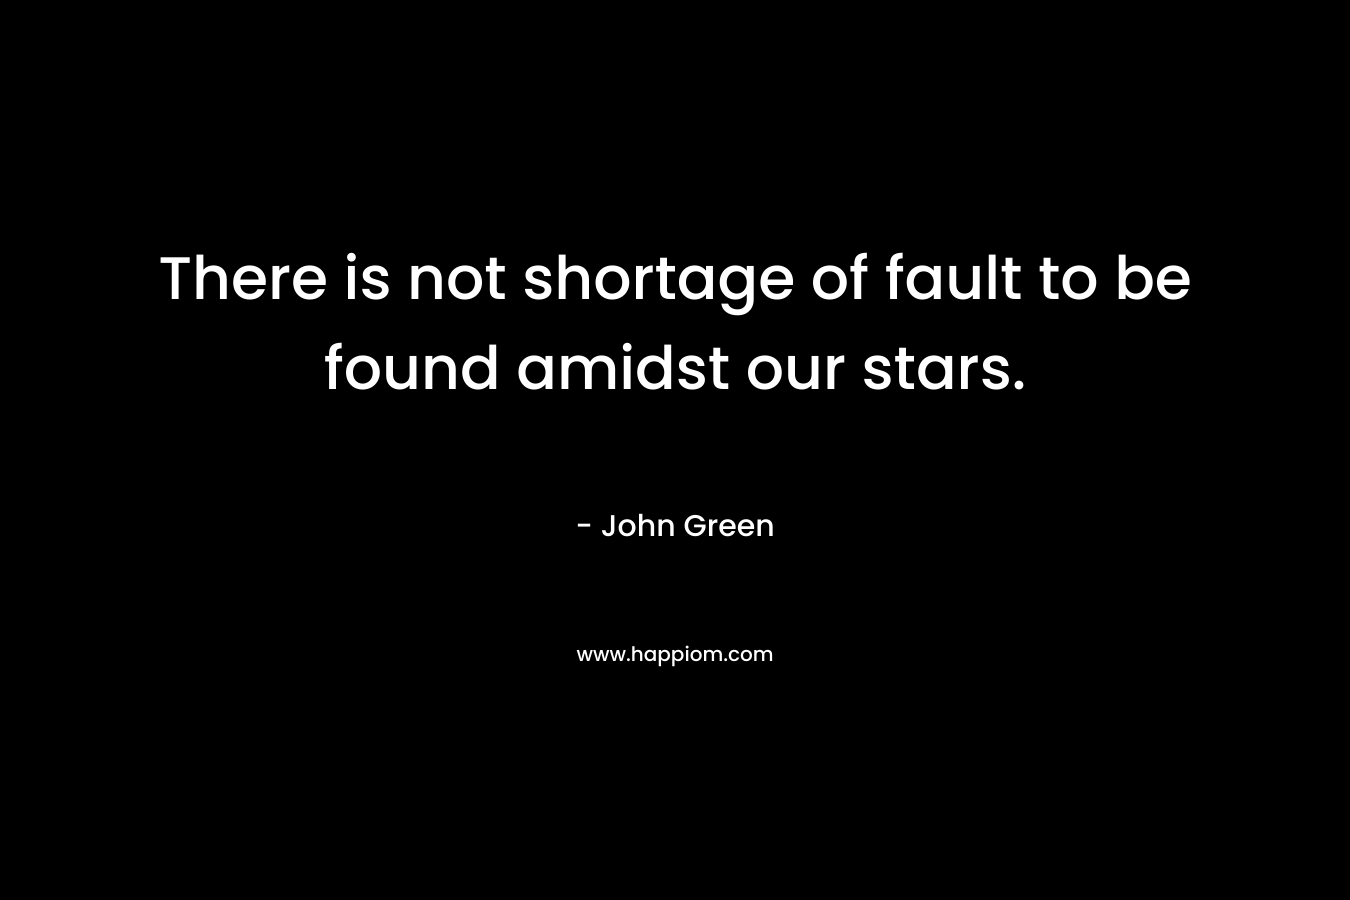 There is not shortage of fault to be found amidst our stars. – John Green